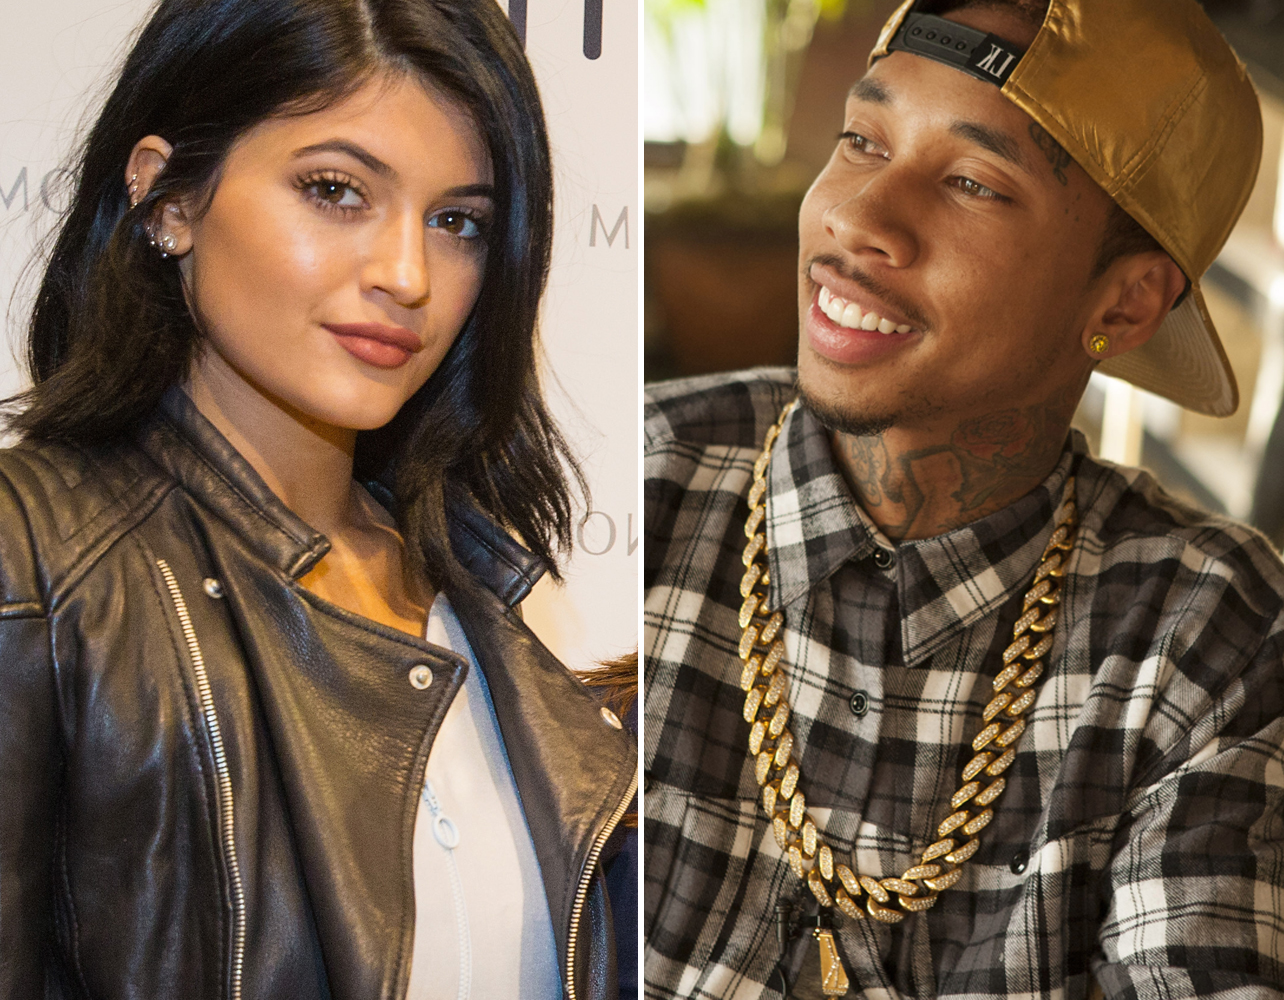 Are Kylie Jenner And Tyga Getting Serious? - J-14